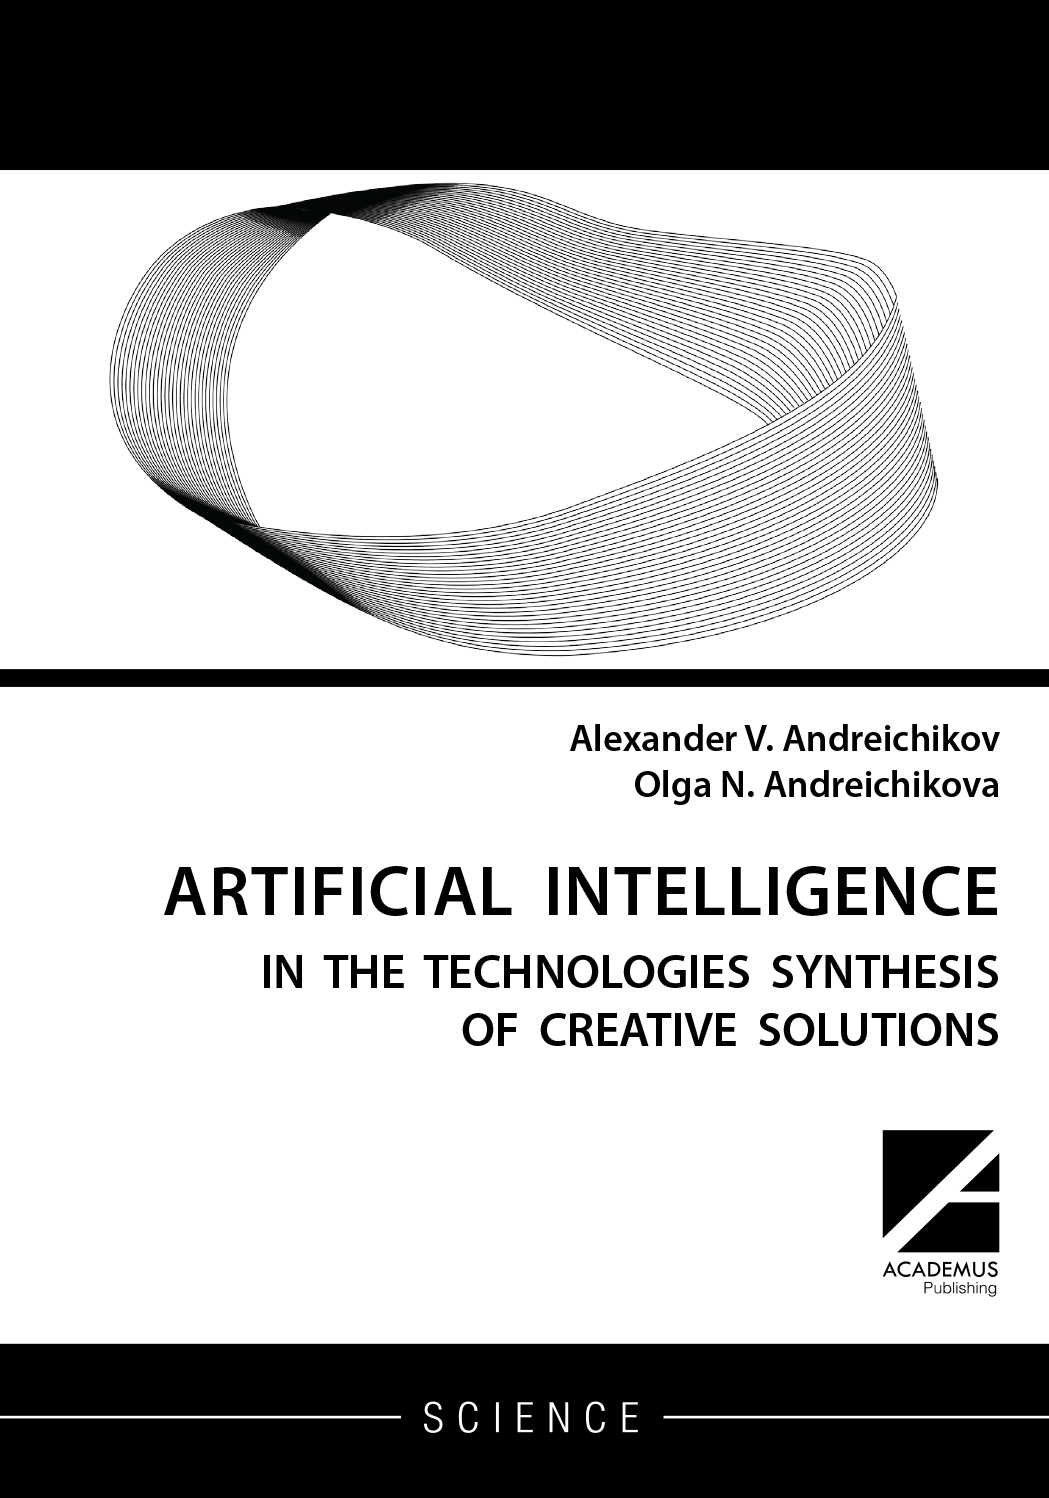                         ARTIFICIAL INTELLIGENCE IN THE SYNTHESIS OF CREATIVE SOLUTIONS
            